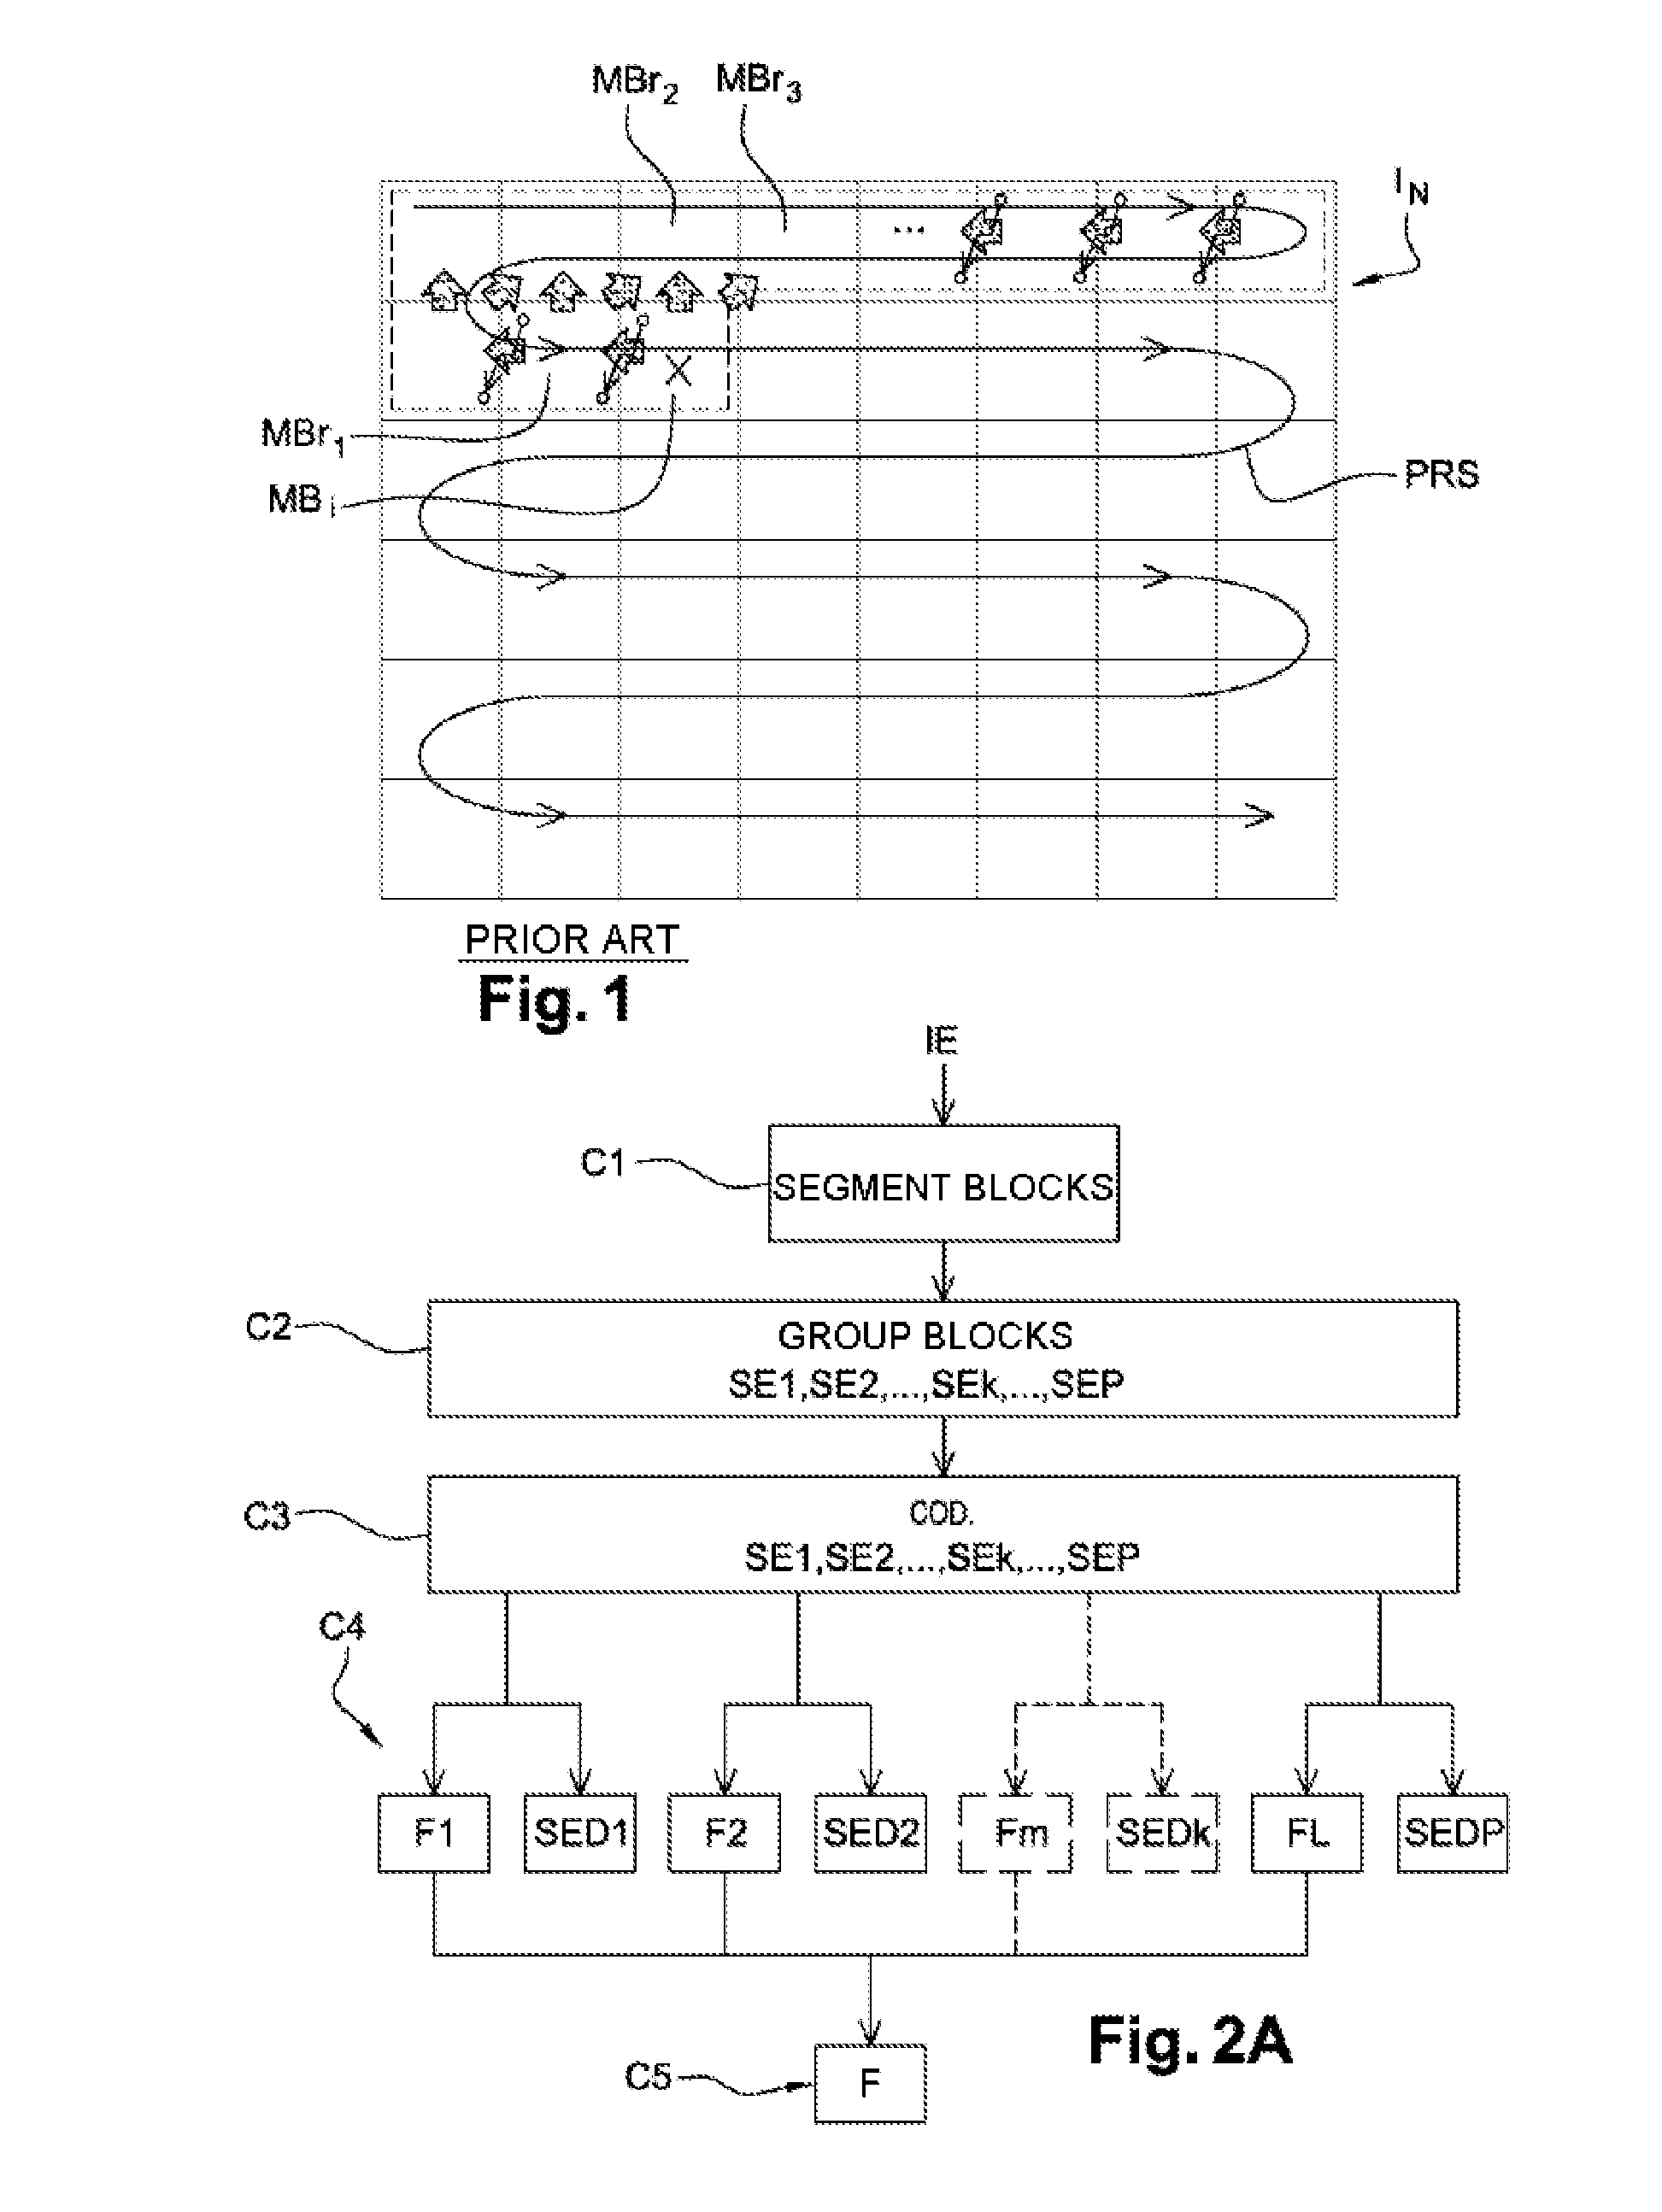 Method for encoding and decoding images, encoding and decoding device, and corresponding computer programs